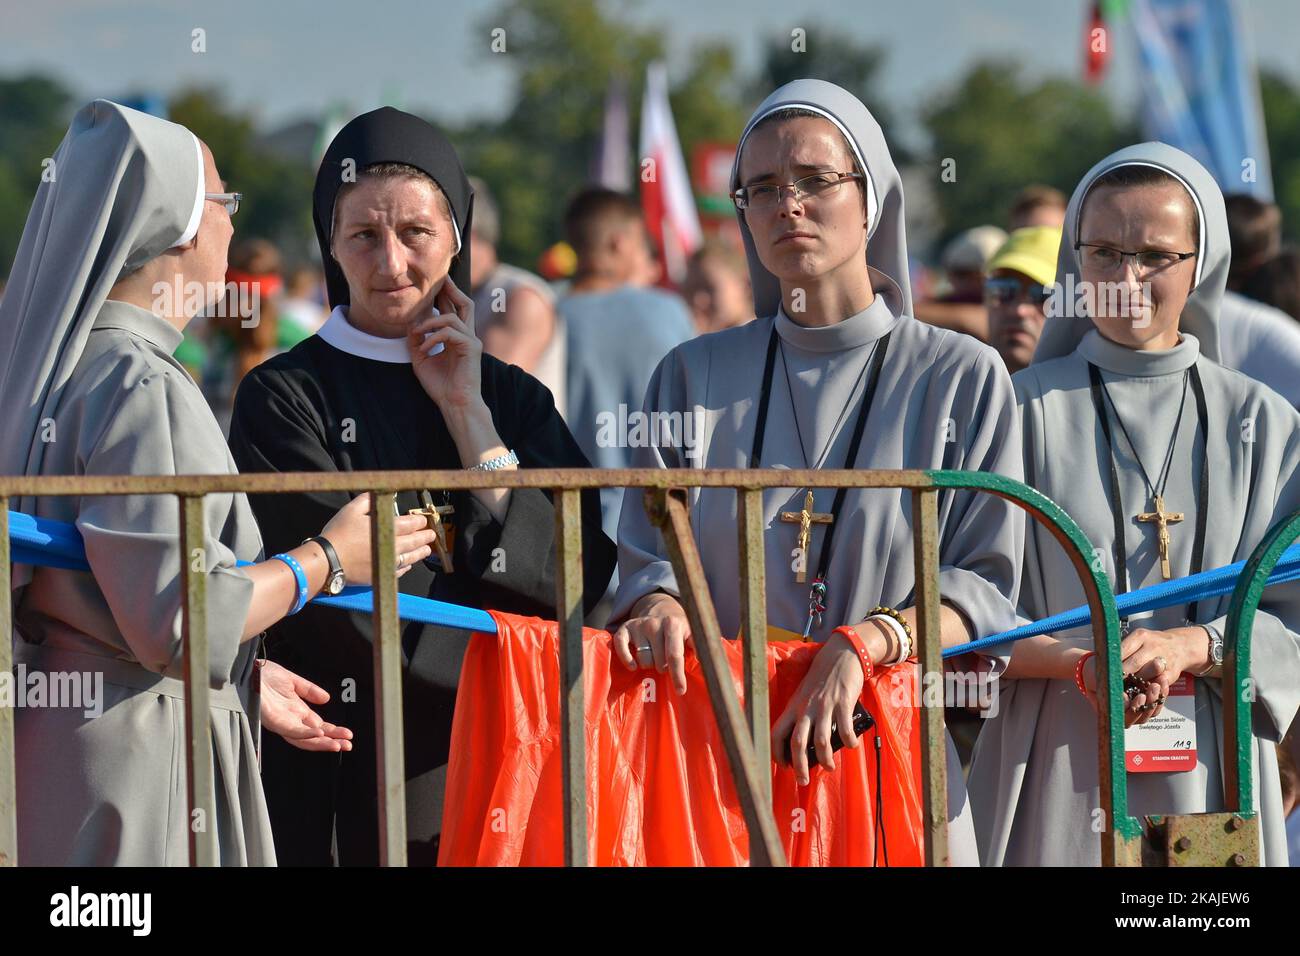 Pope Francis meets with thousands of young pilgrims from all around the world during the Way of the Cross in Krakow's Blonia Park On Friday, 29 July 2016, in Krakow, Poland.  Stock Photo